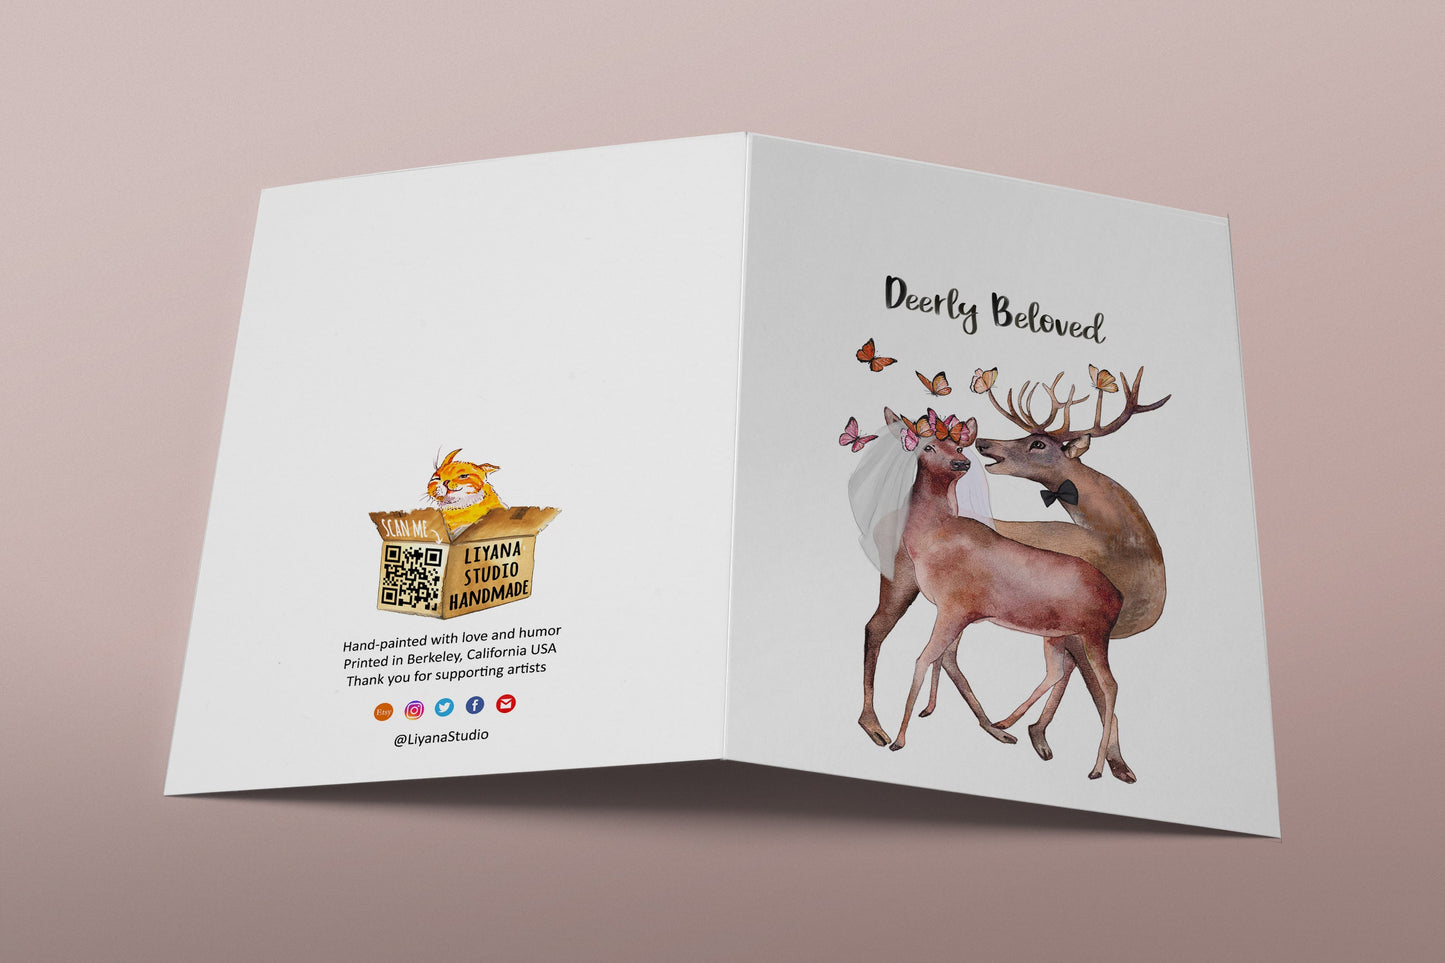 Deers Couple Wedding Cards Funny Puns - Deerly Beloved - Wedding Anniversary Cards For Husband